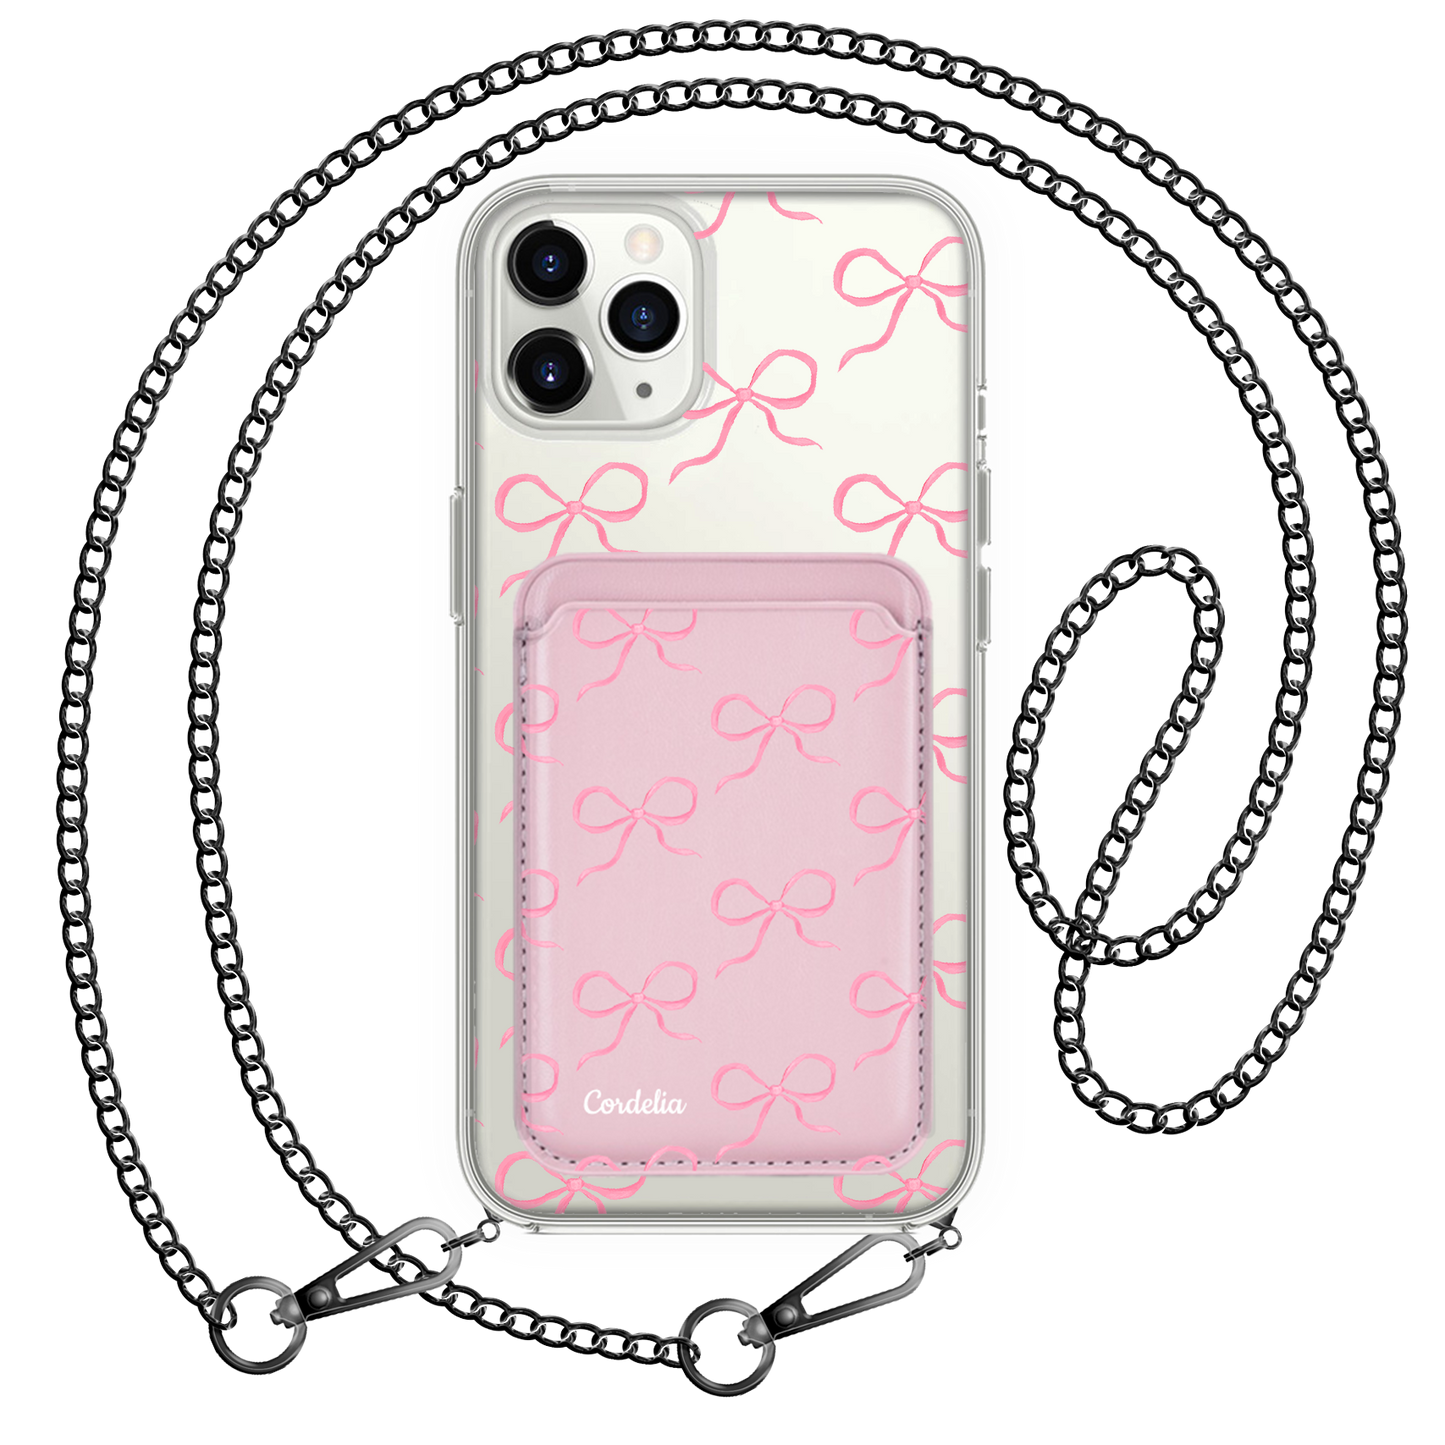 iPhone Magnetic Wallet Case - Coquette Pink Bow 1.0